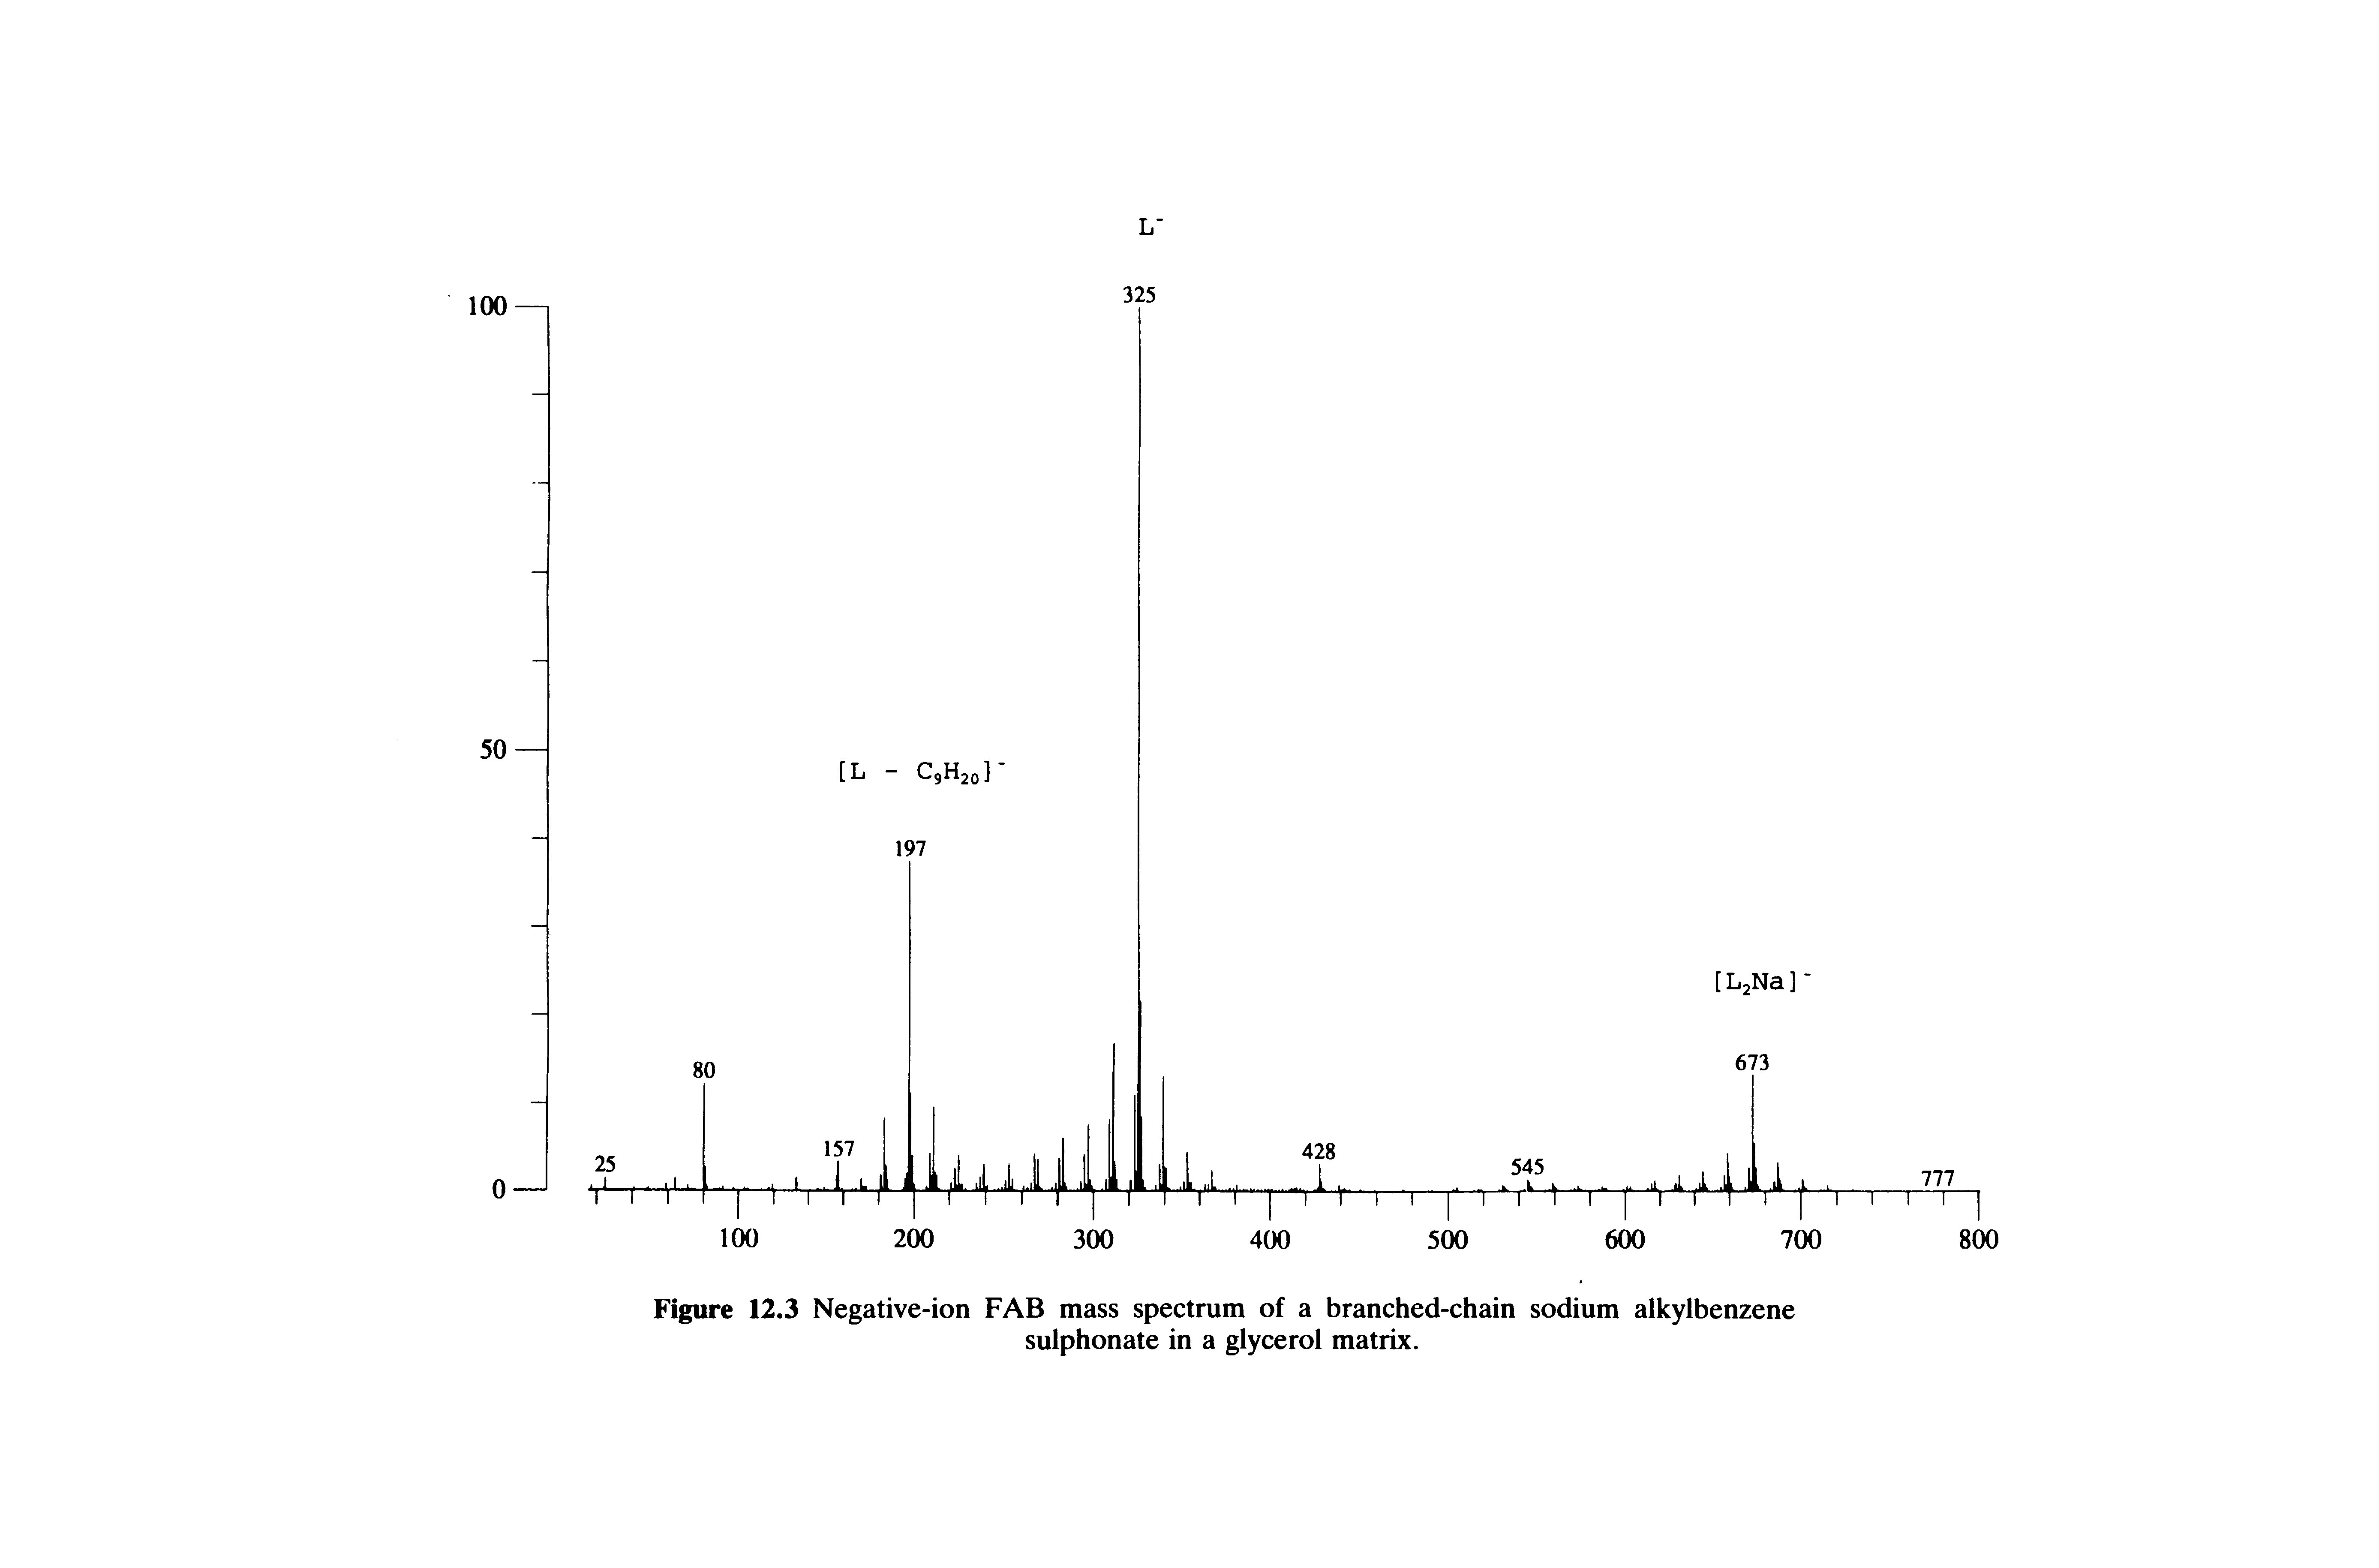 Figure 12.3 Negative-ion FAB mass spectrum of a branched-chain sodium alkylbenzene suiphonate in a glycerol matrix.